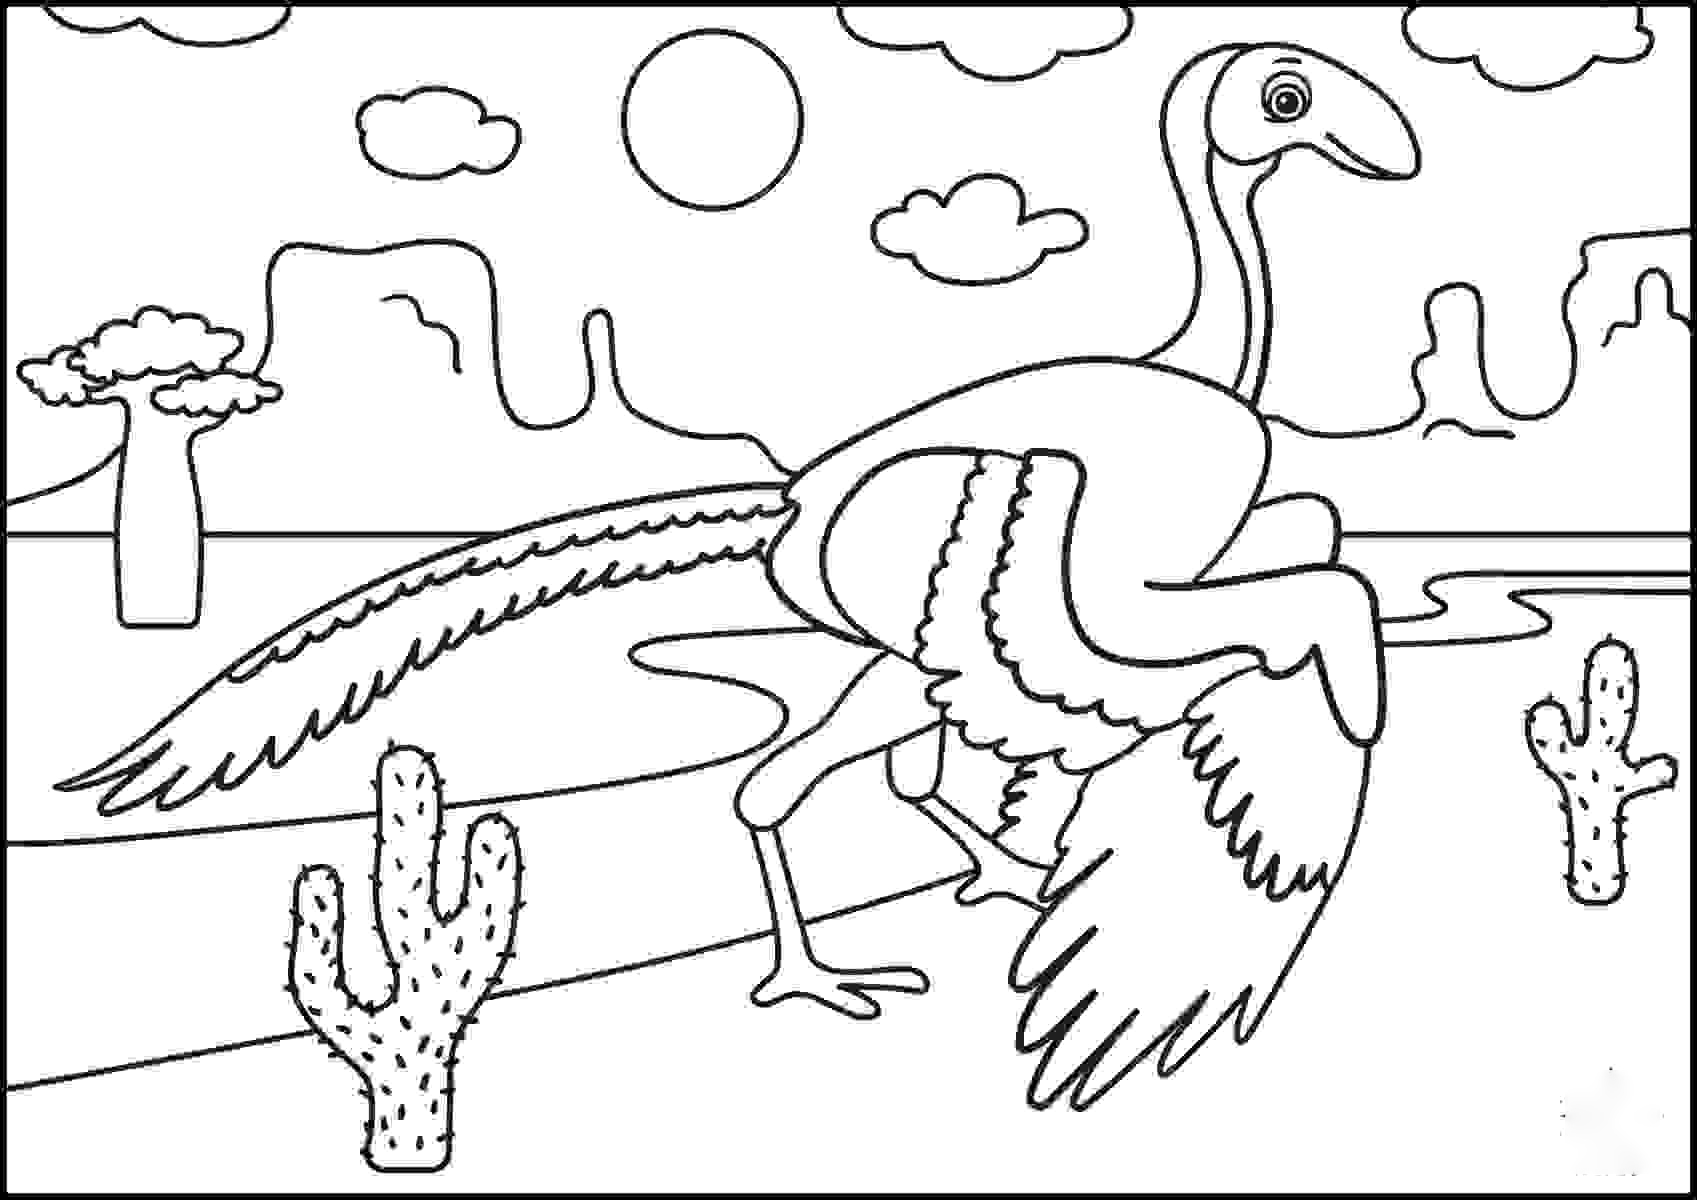 Archaeopteryx Dinosaur drawing simple for preschool Coloring Pages